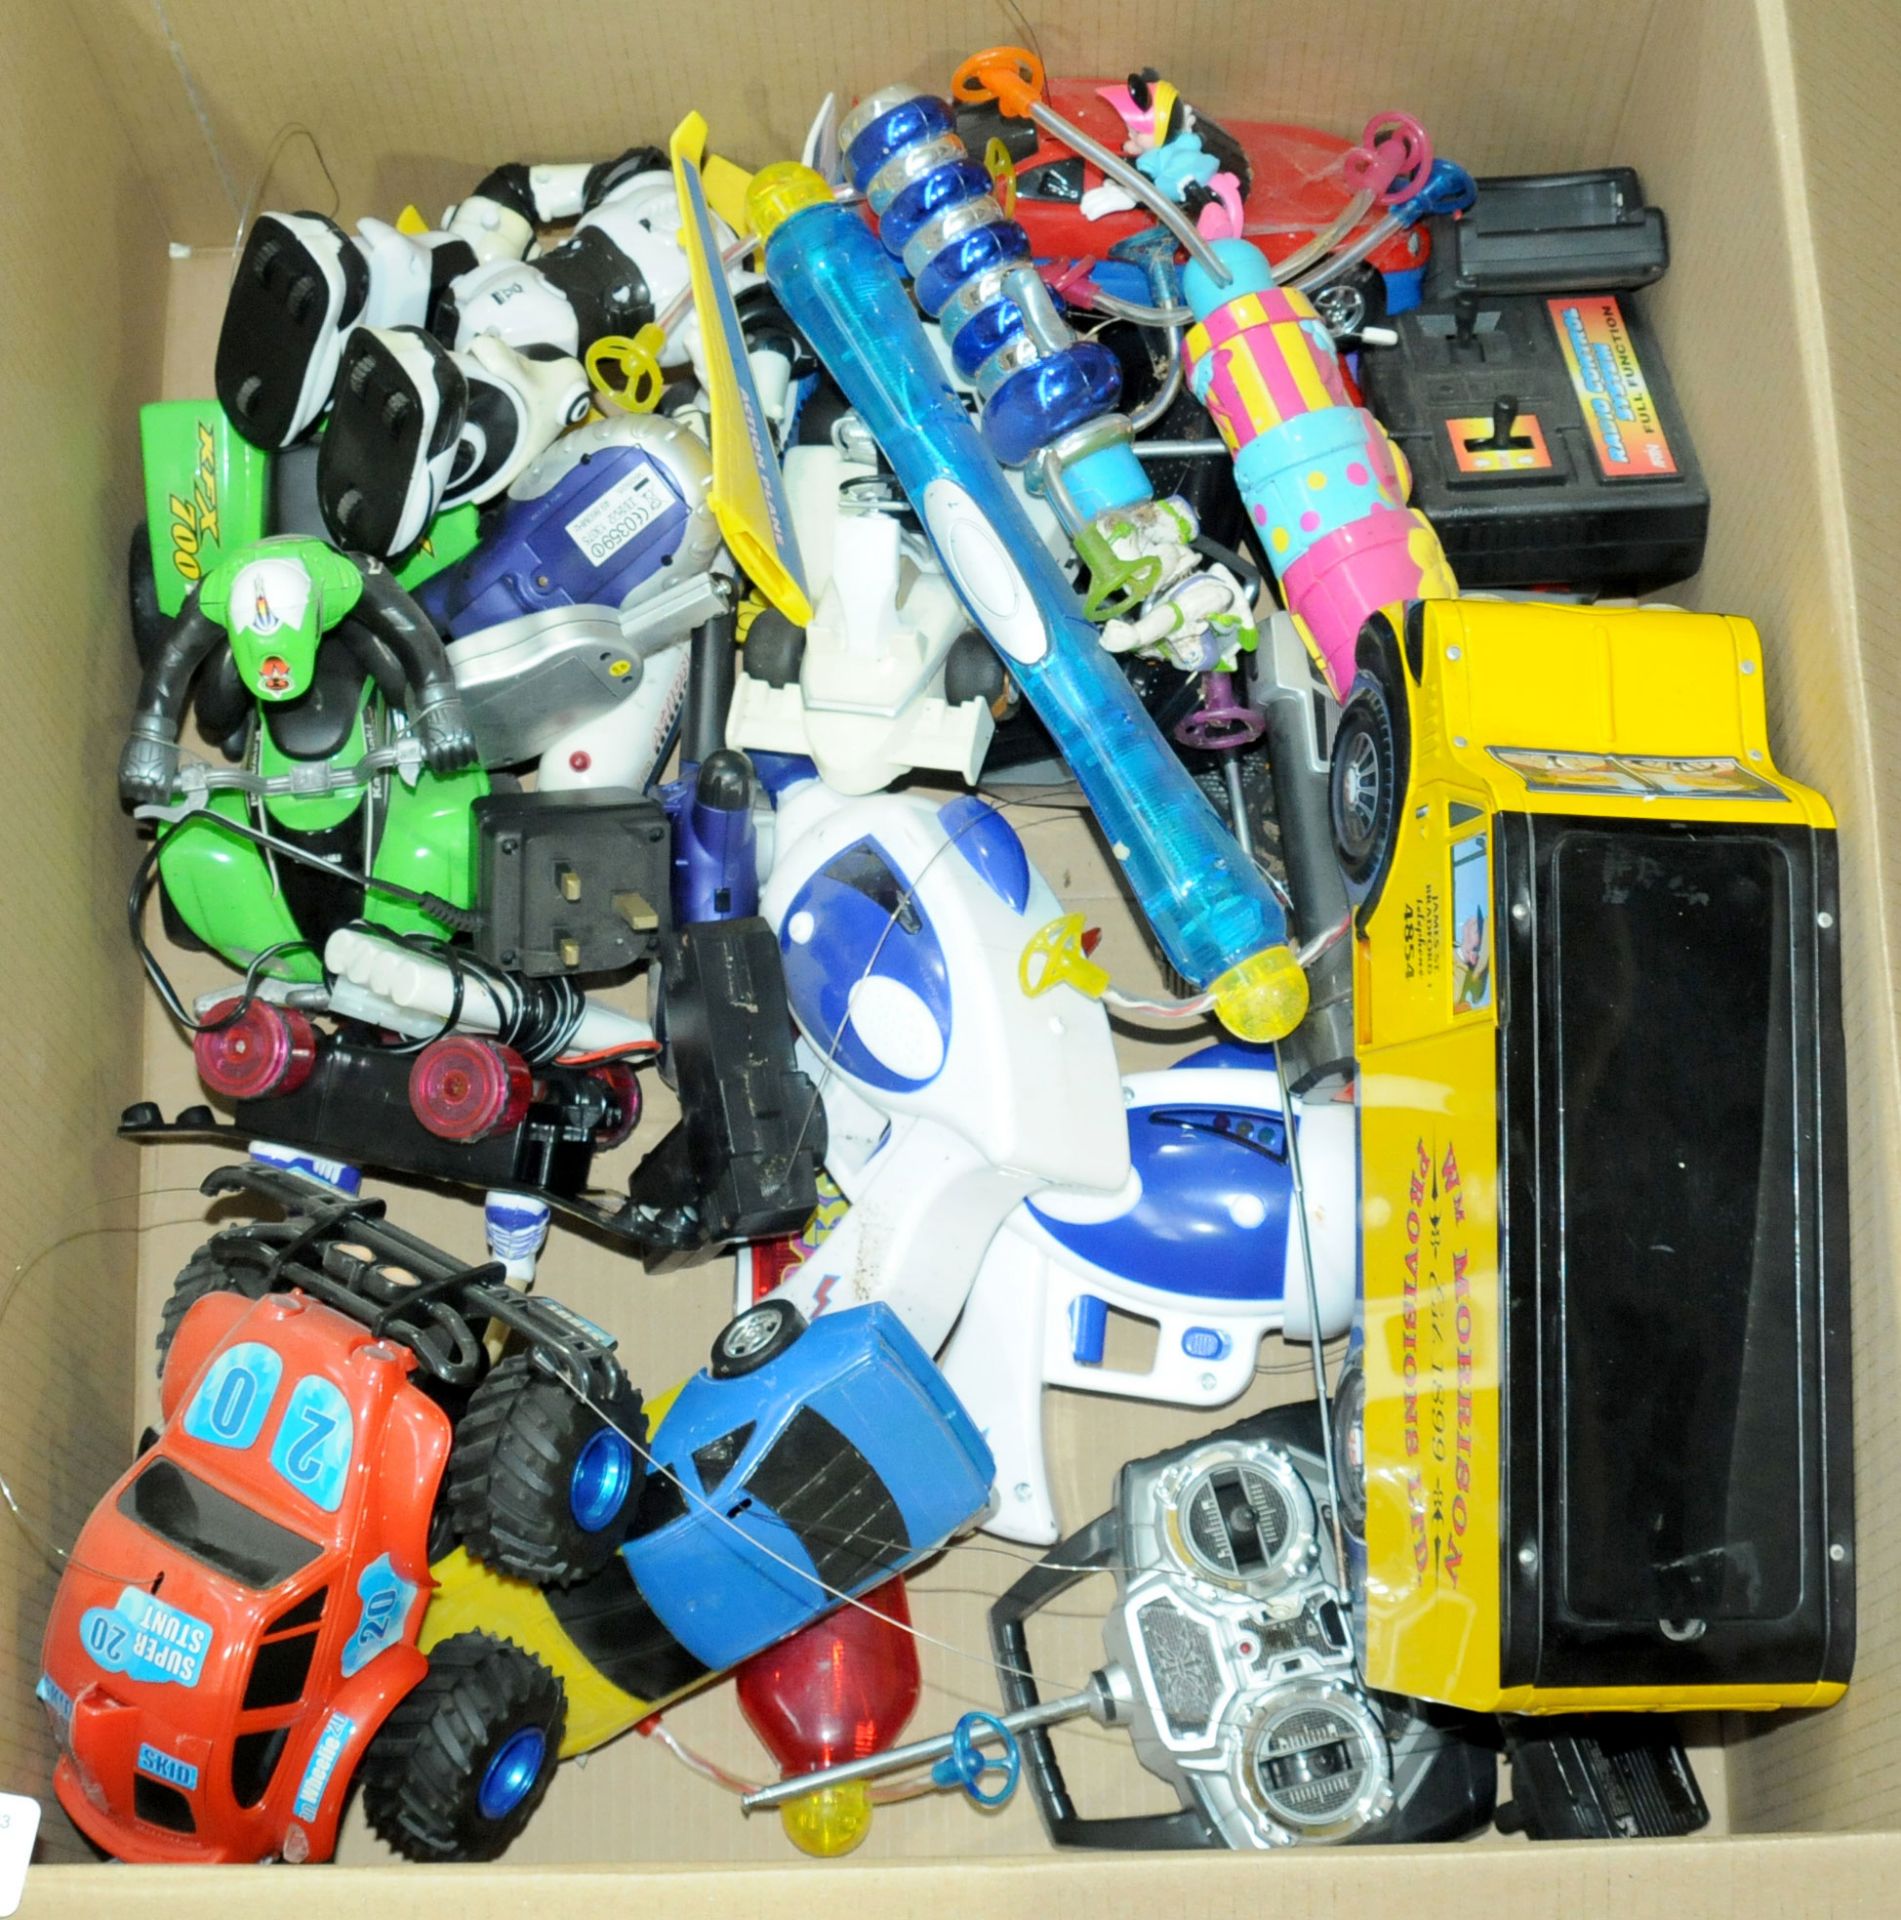 Radio Control items a Skate Man and others (see